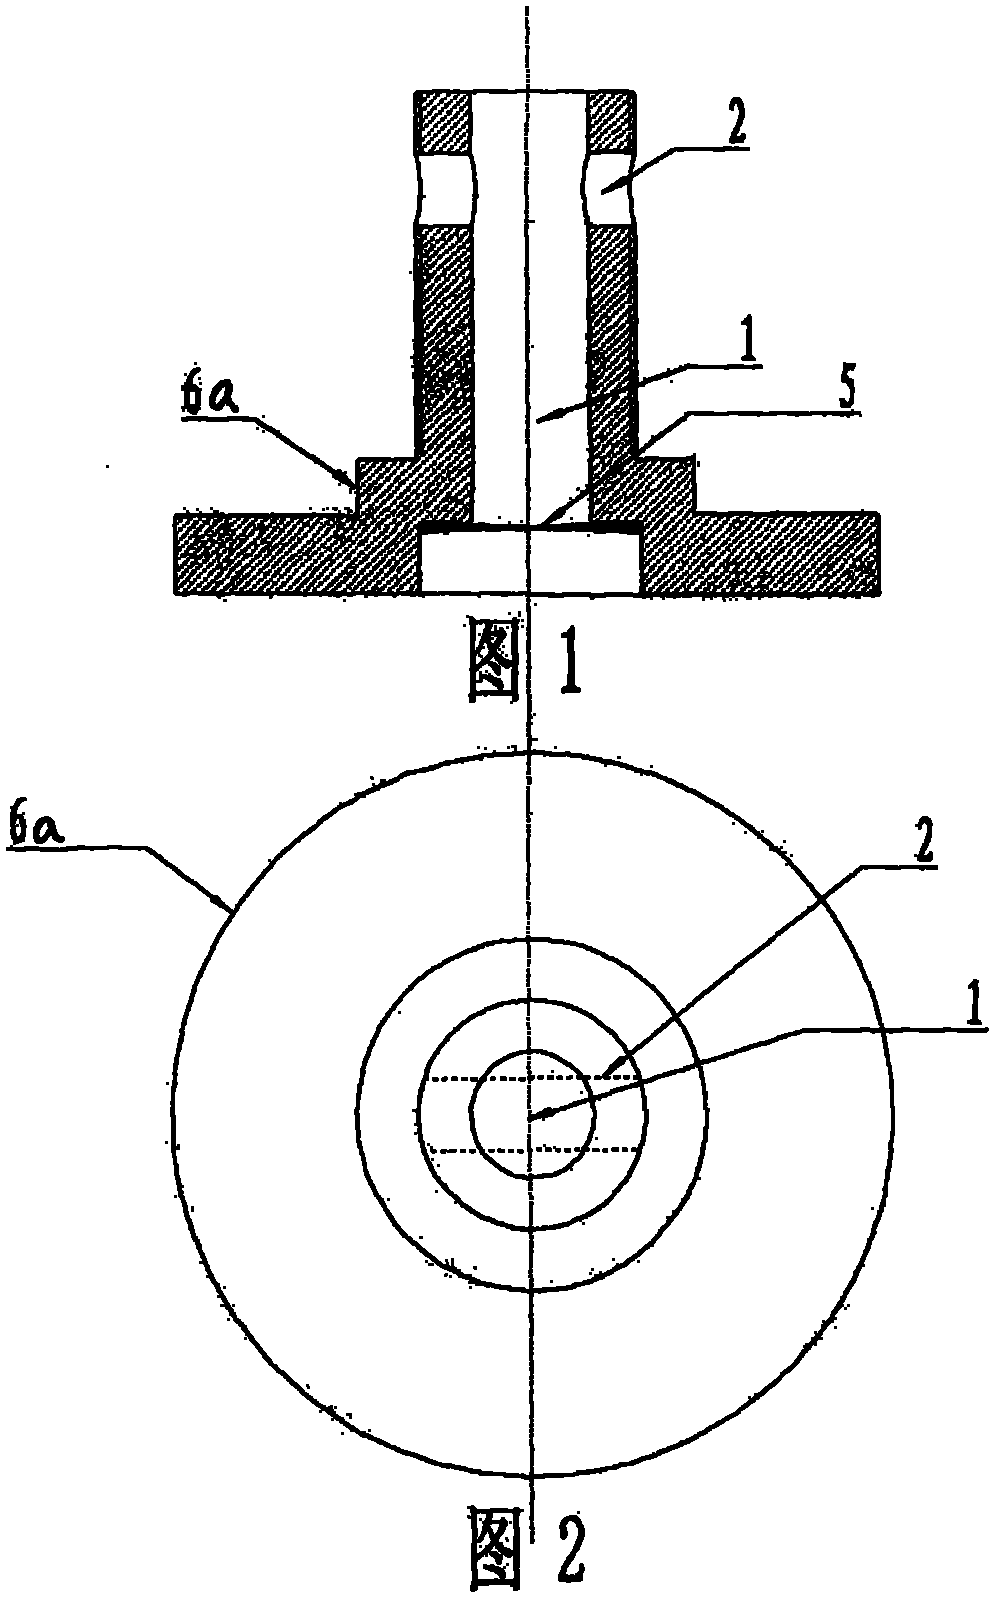 Explosion-proof structure of energy-storing device